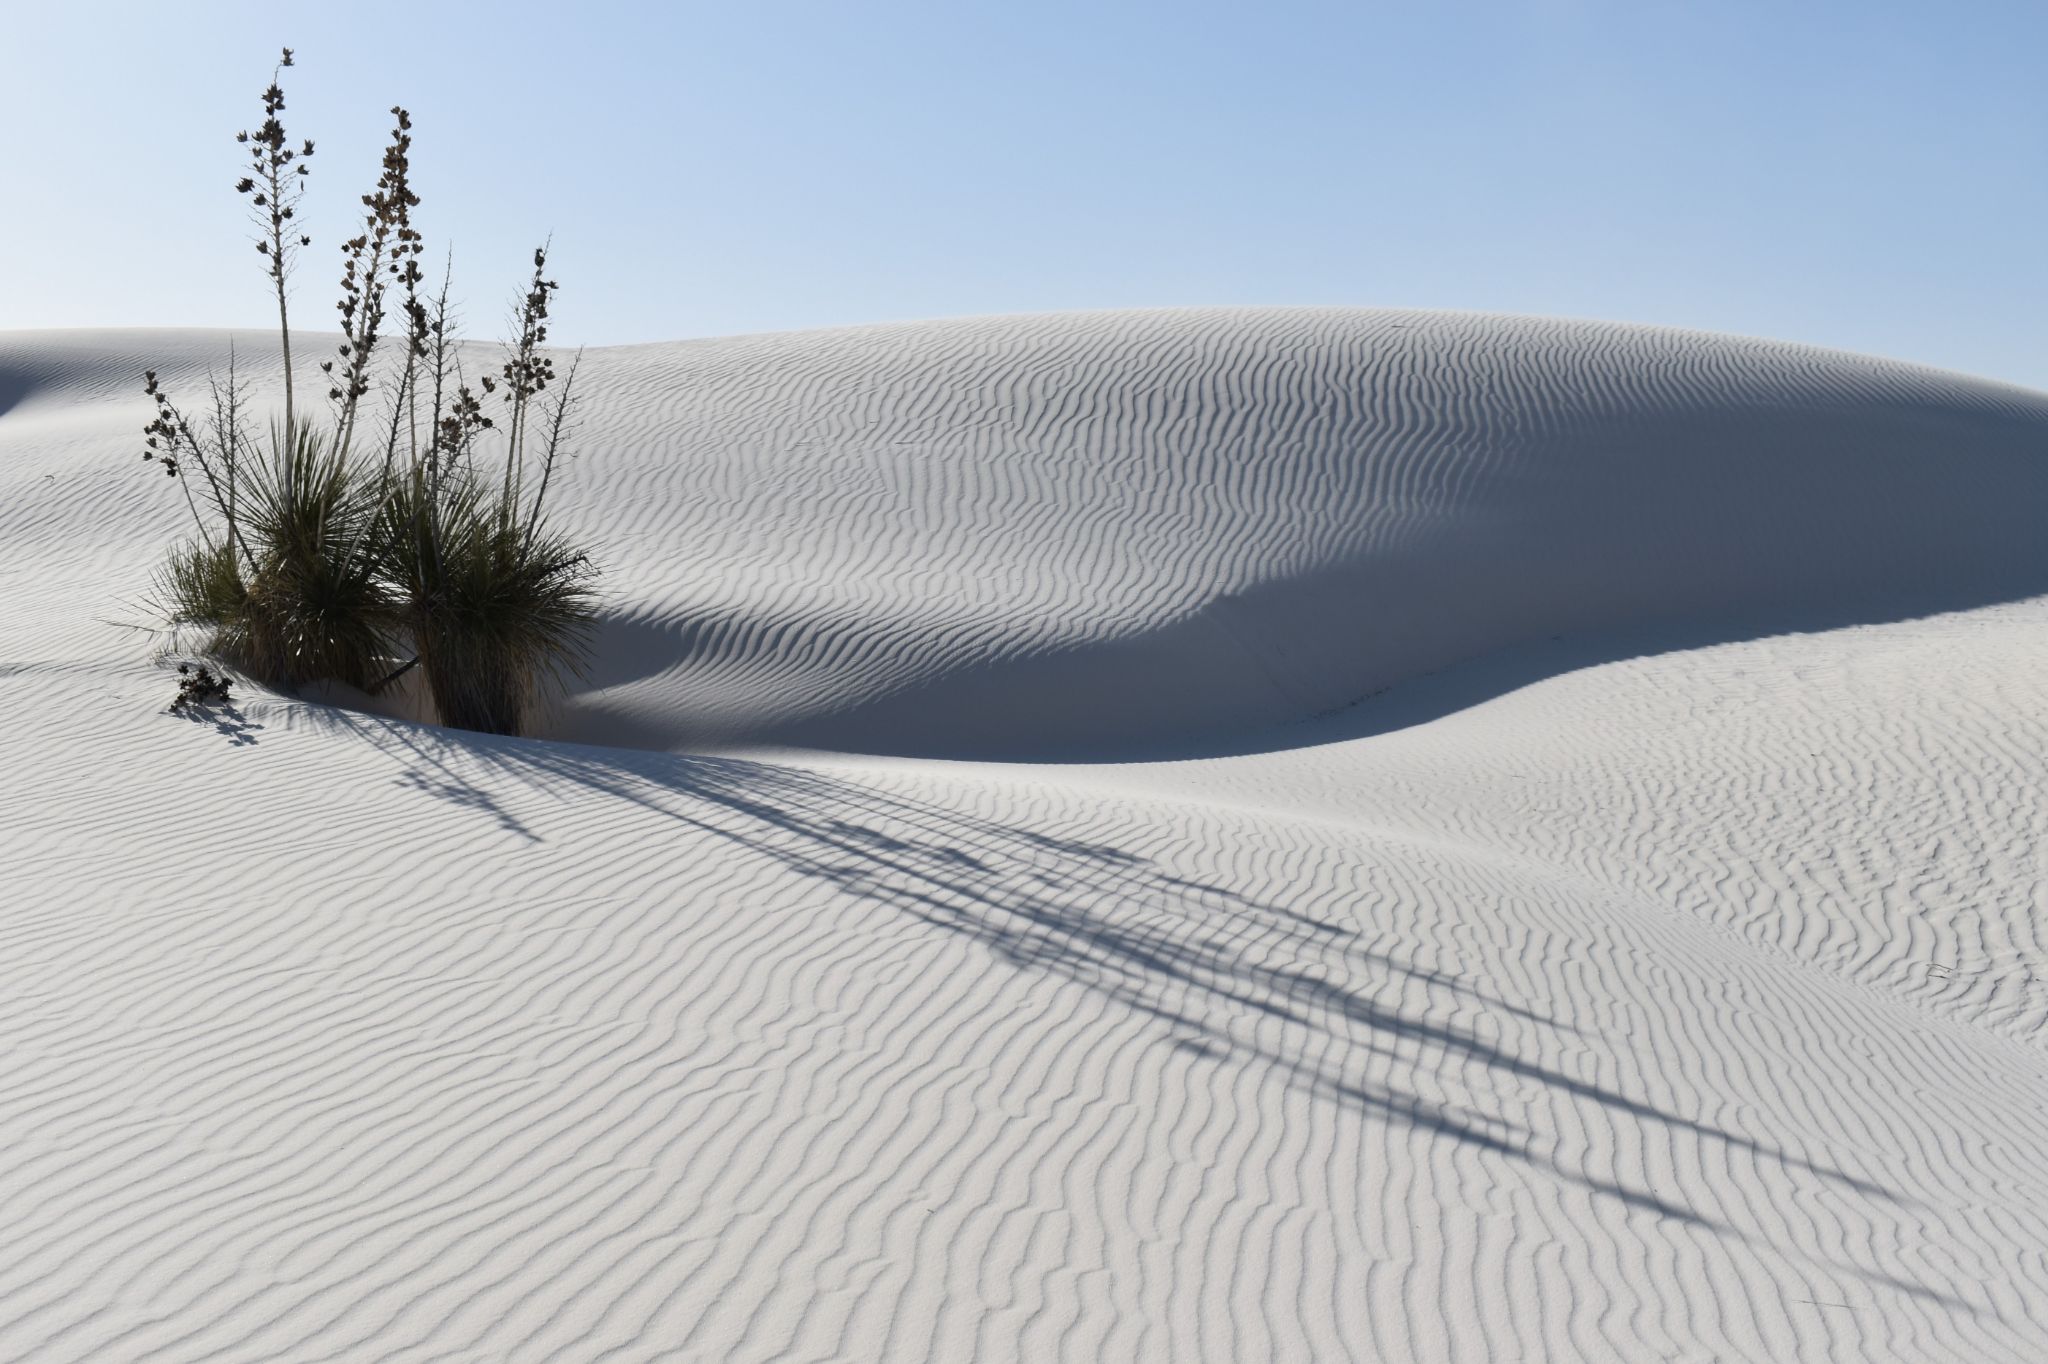 Community photo by James Gaulding | White Sands National Park, New Mexico, U.S.A.